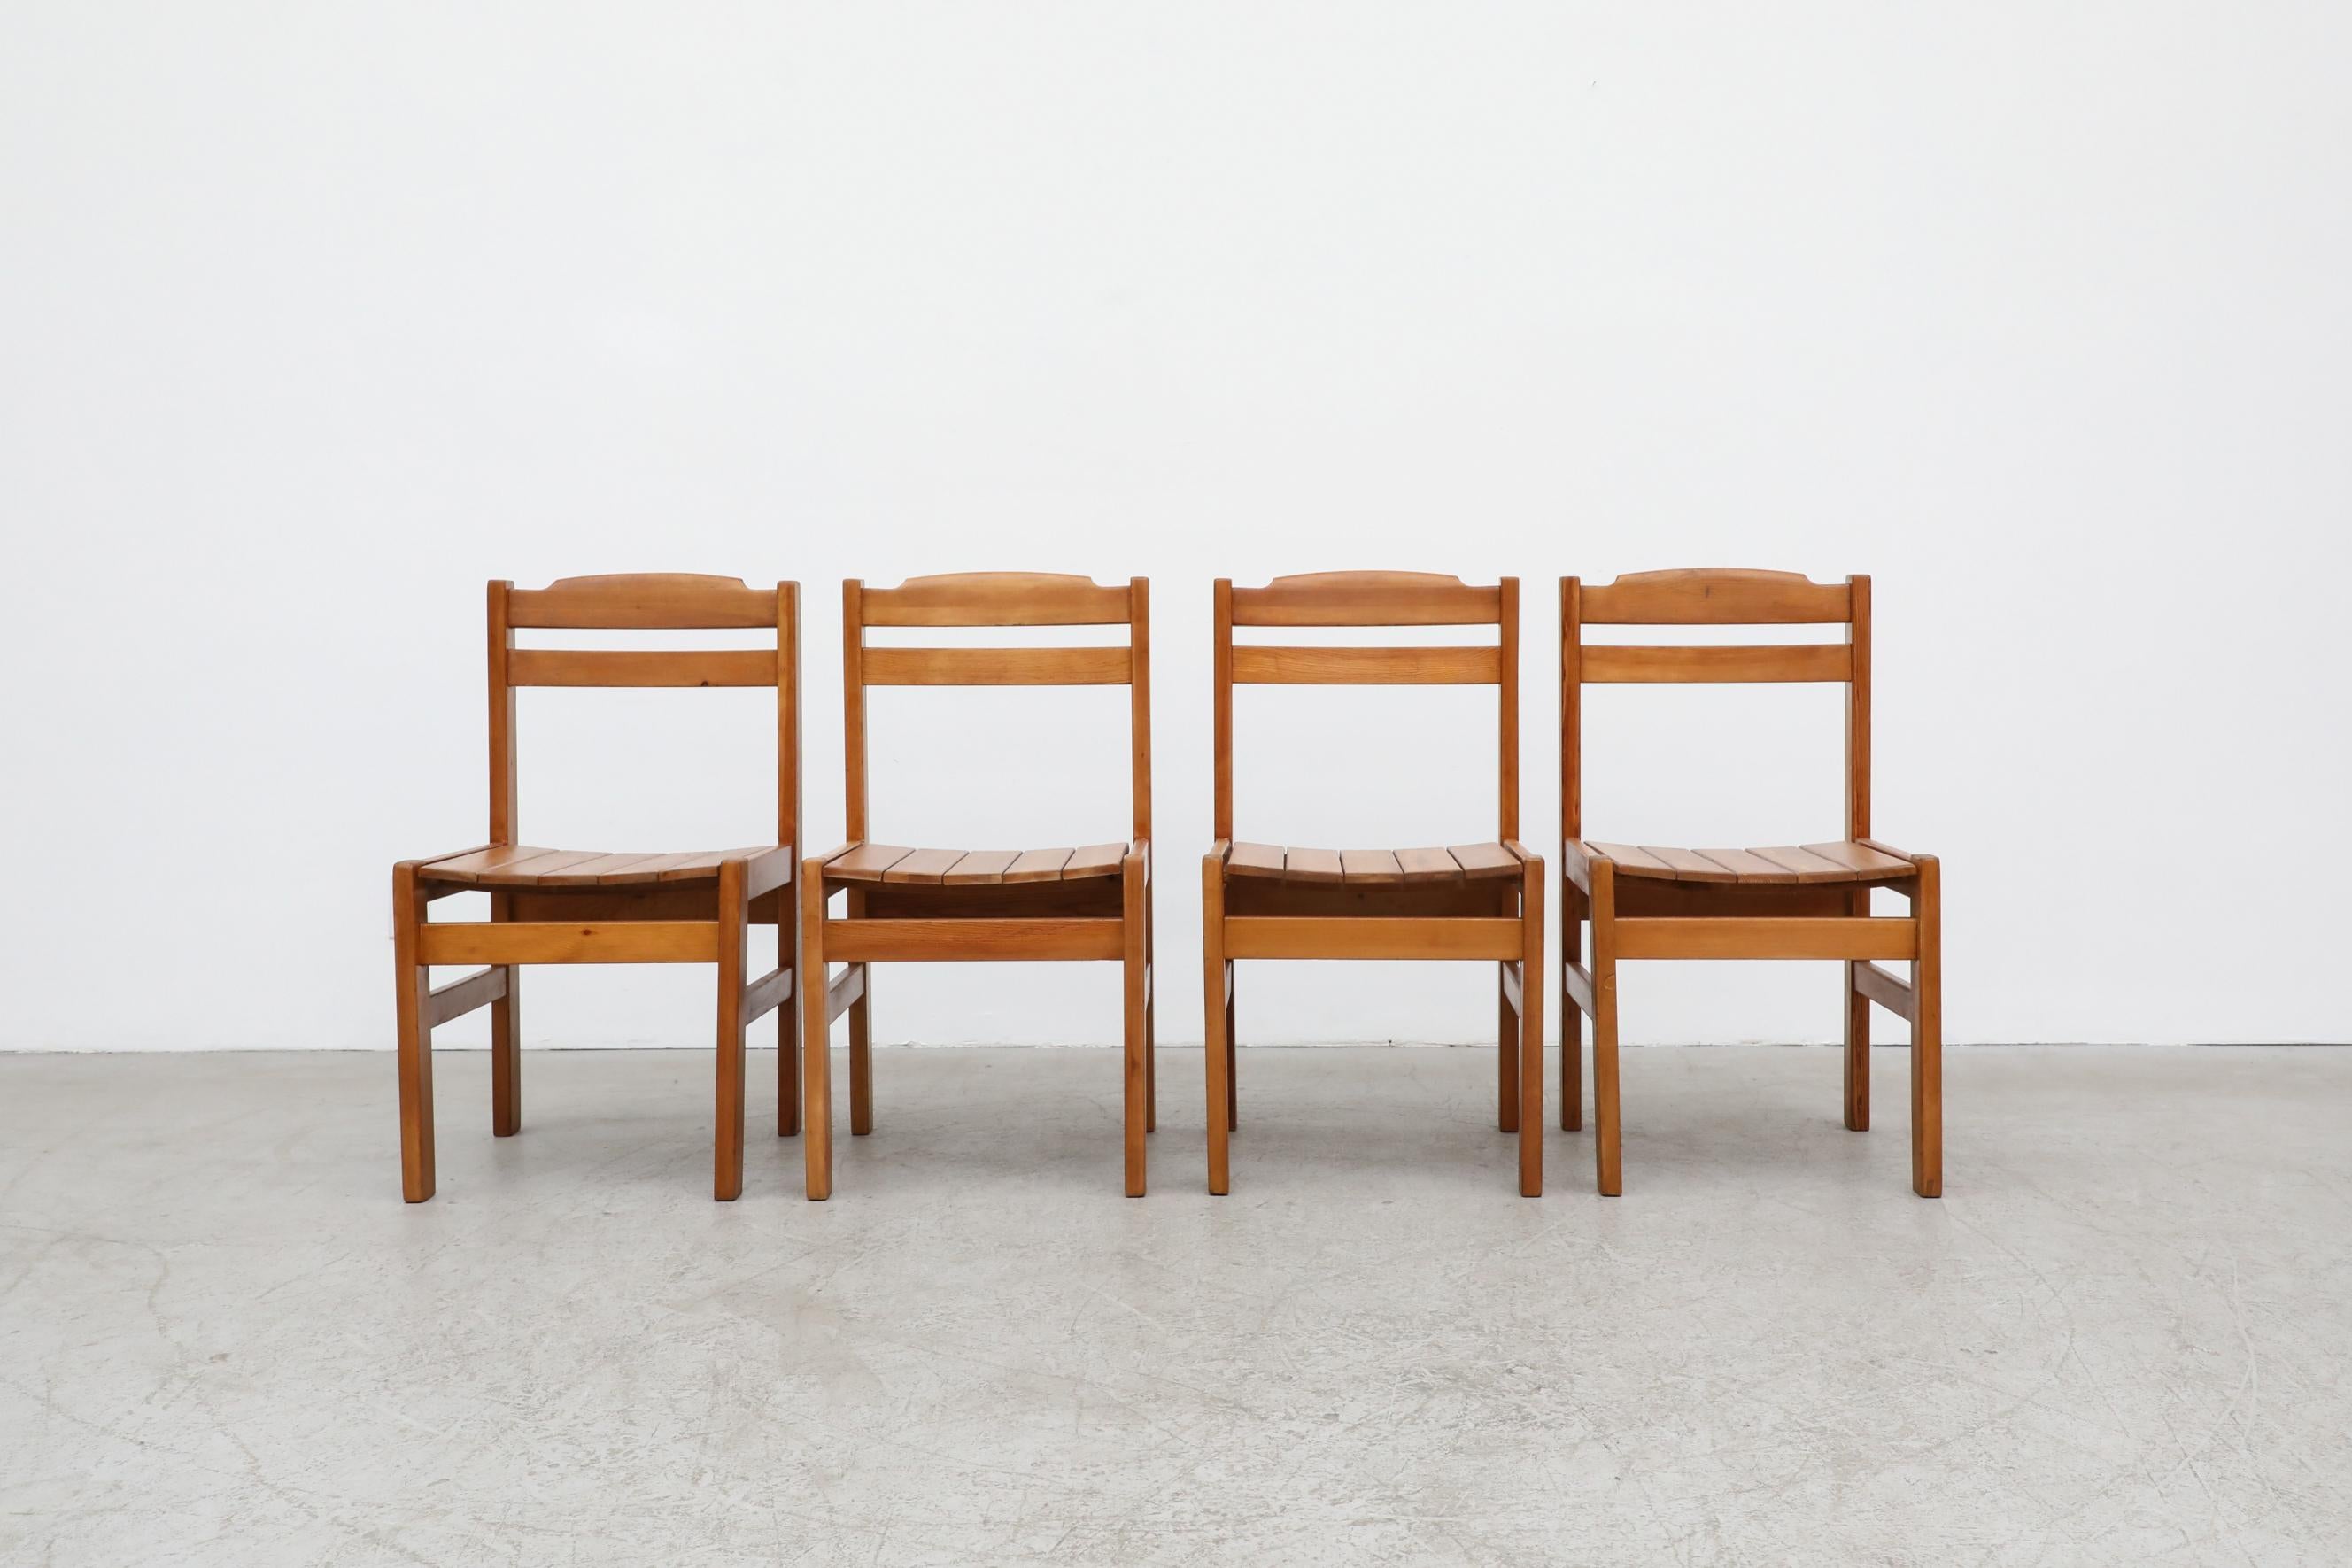 Set of 4 pine side chairs designed in the style Ate van Apeldoorn featuring a lovely little detail on the top backrest five pine slats for the seating. The set is in original condition with wear consistent with their age and use. Set Price.